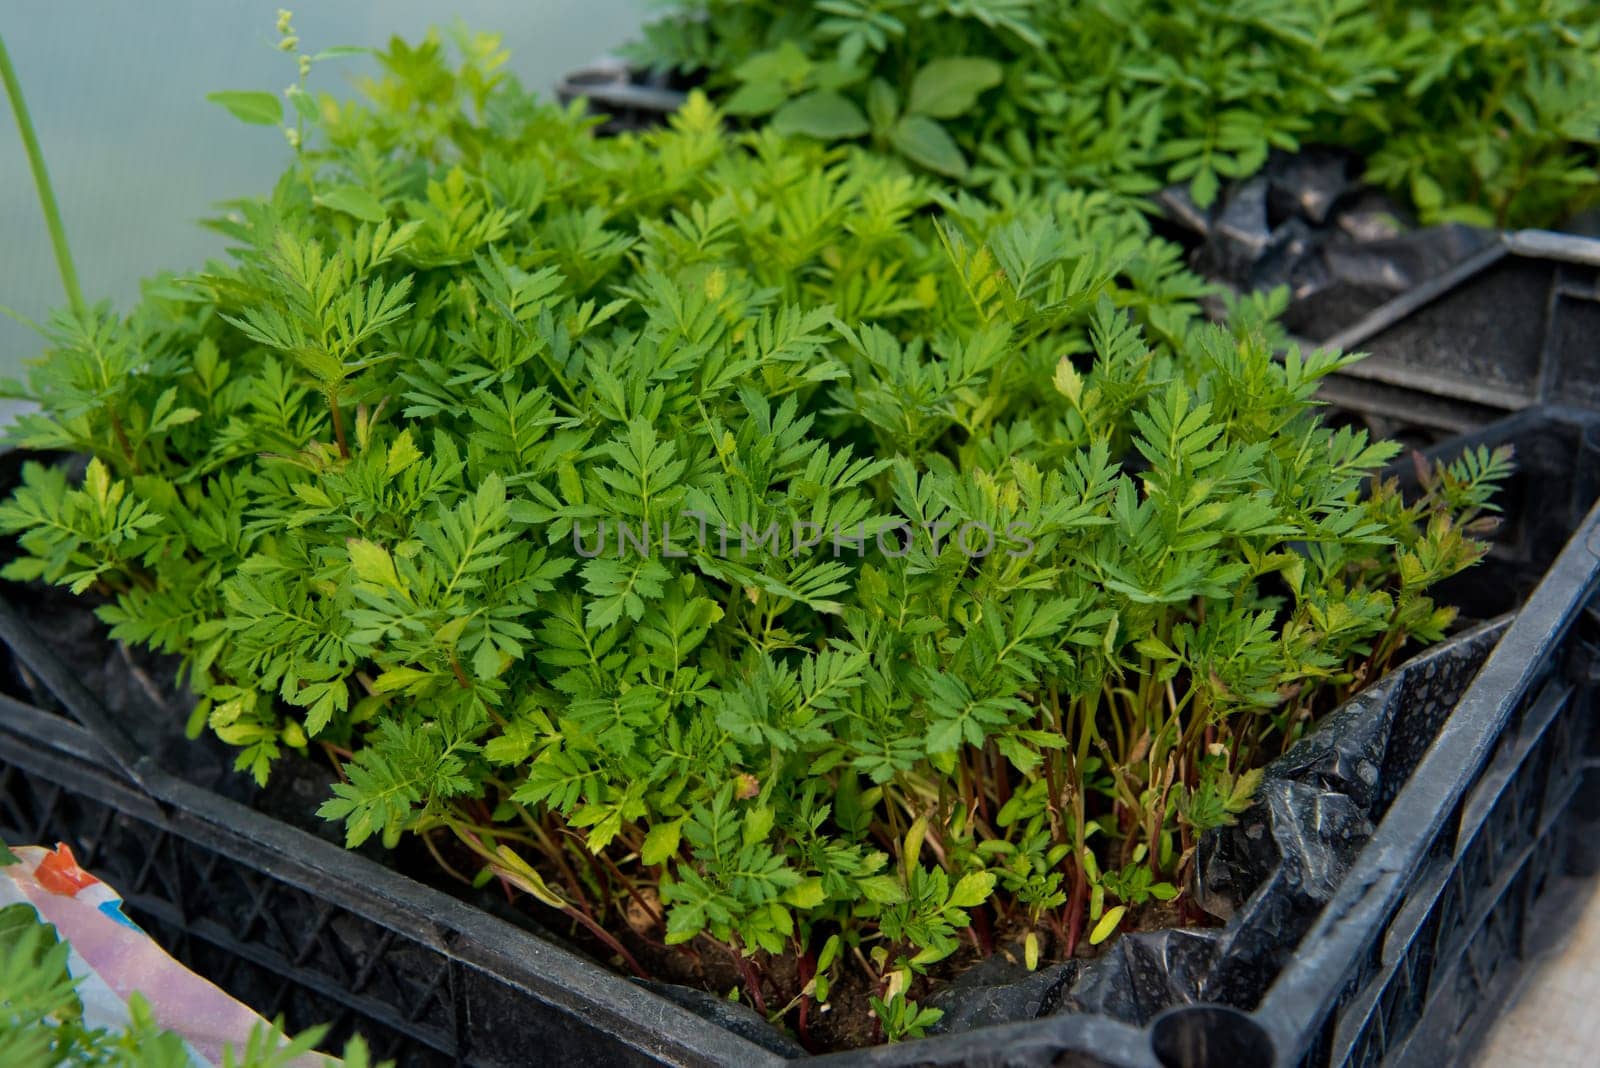 Seedlings of flowers in a plastic container in a greenhouse. Selective focus.